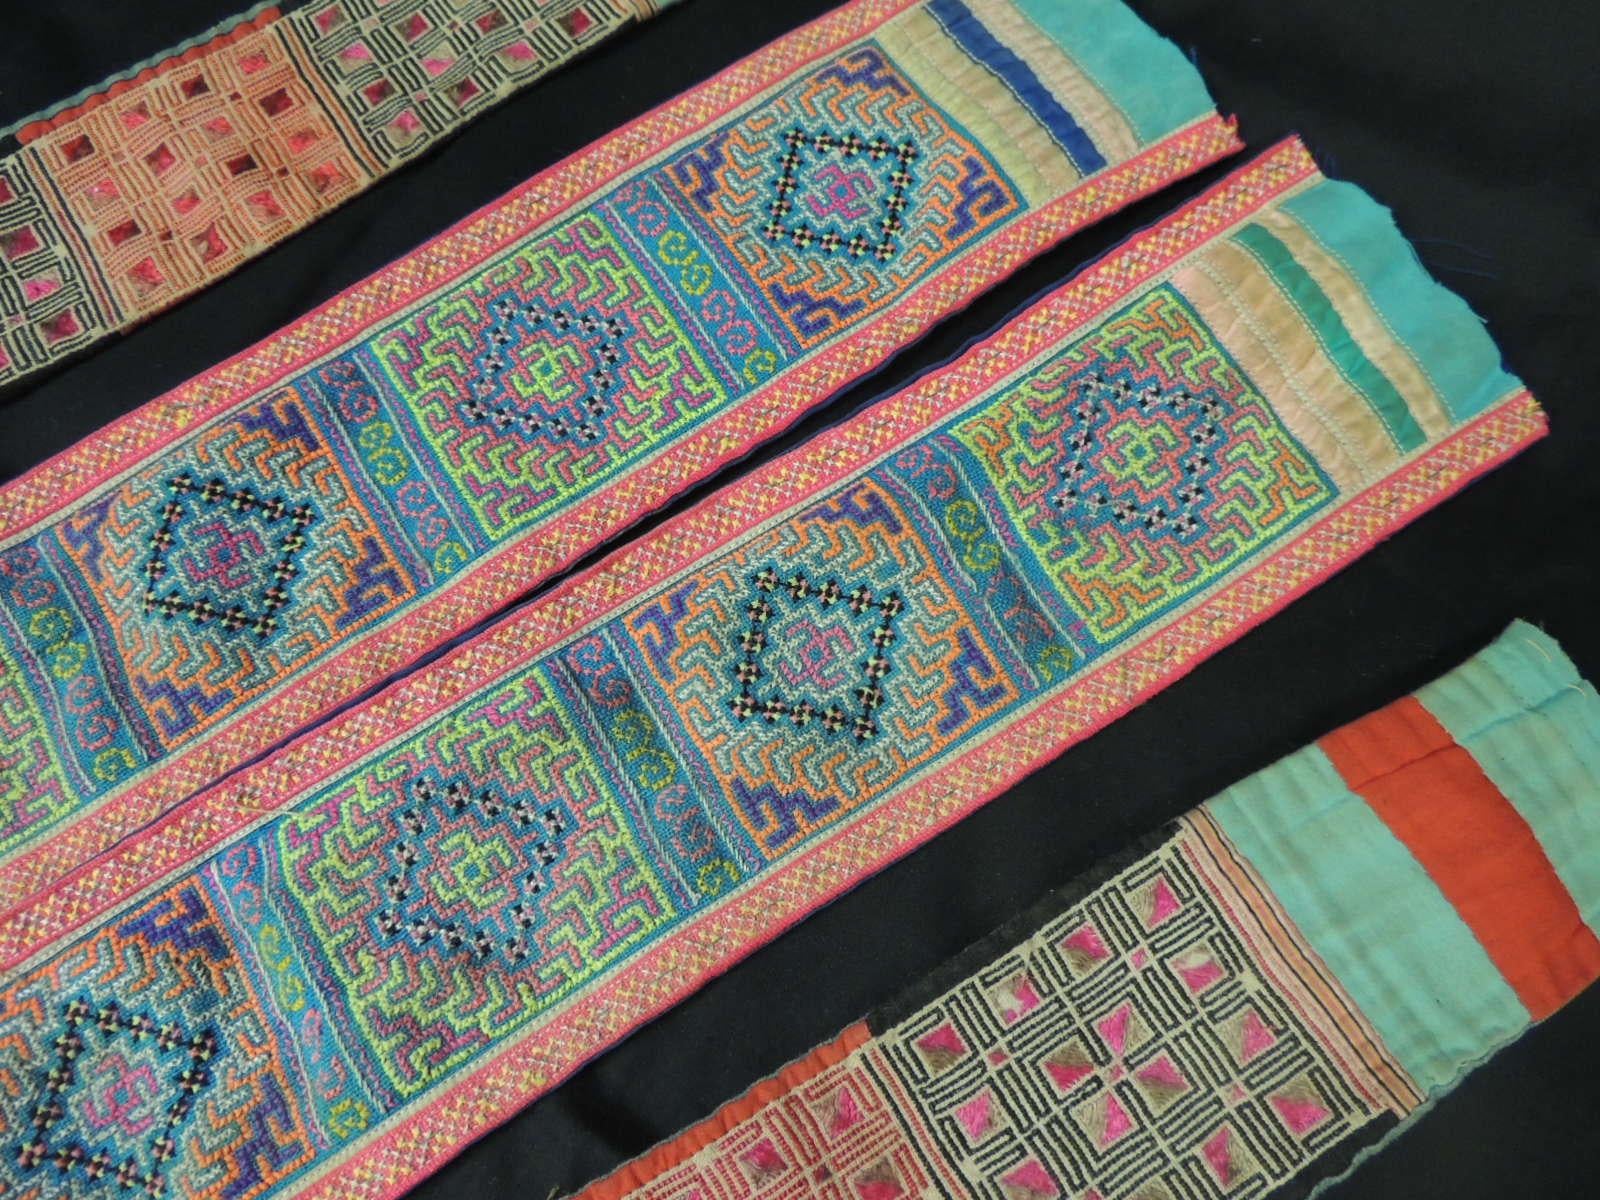 Chinese Vintage Green and Pink Asian Quilted Colorful Decorative Trims